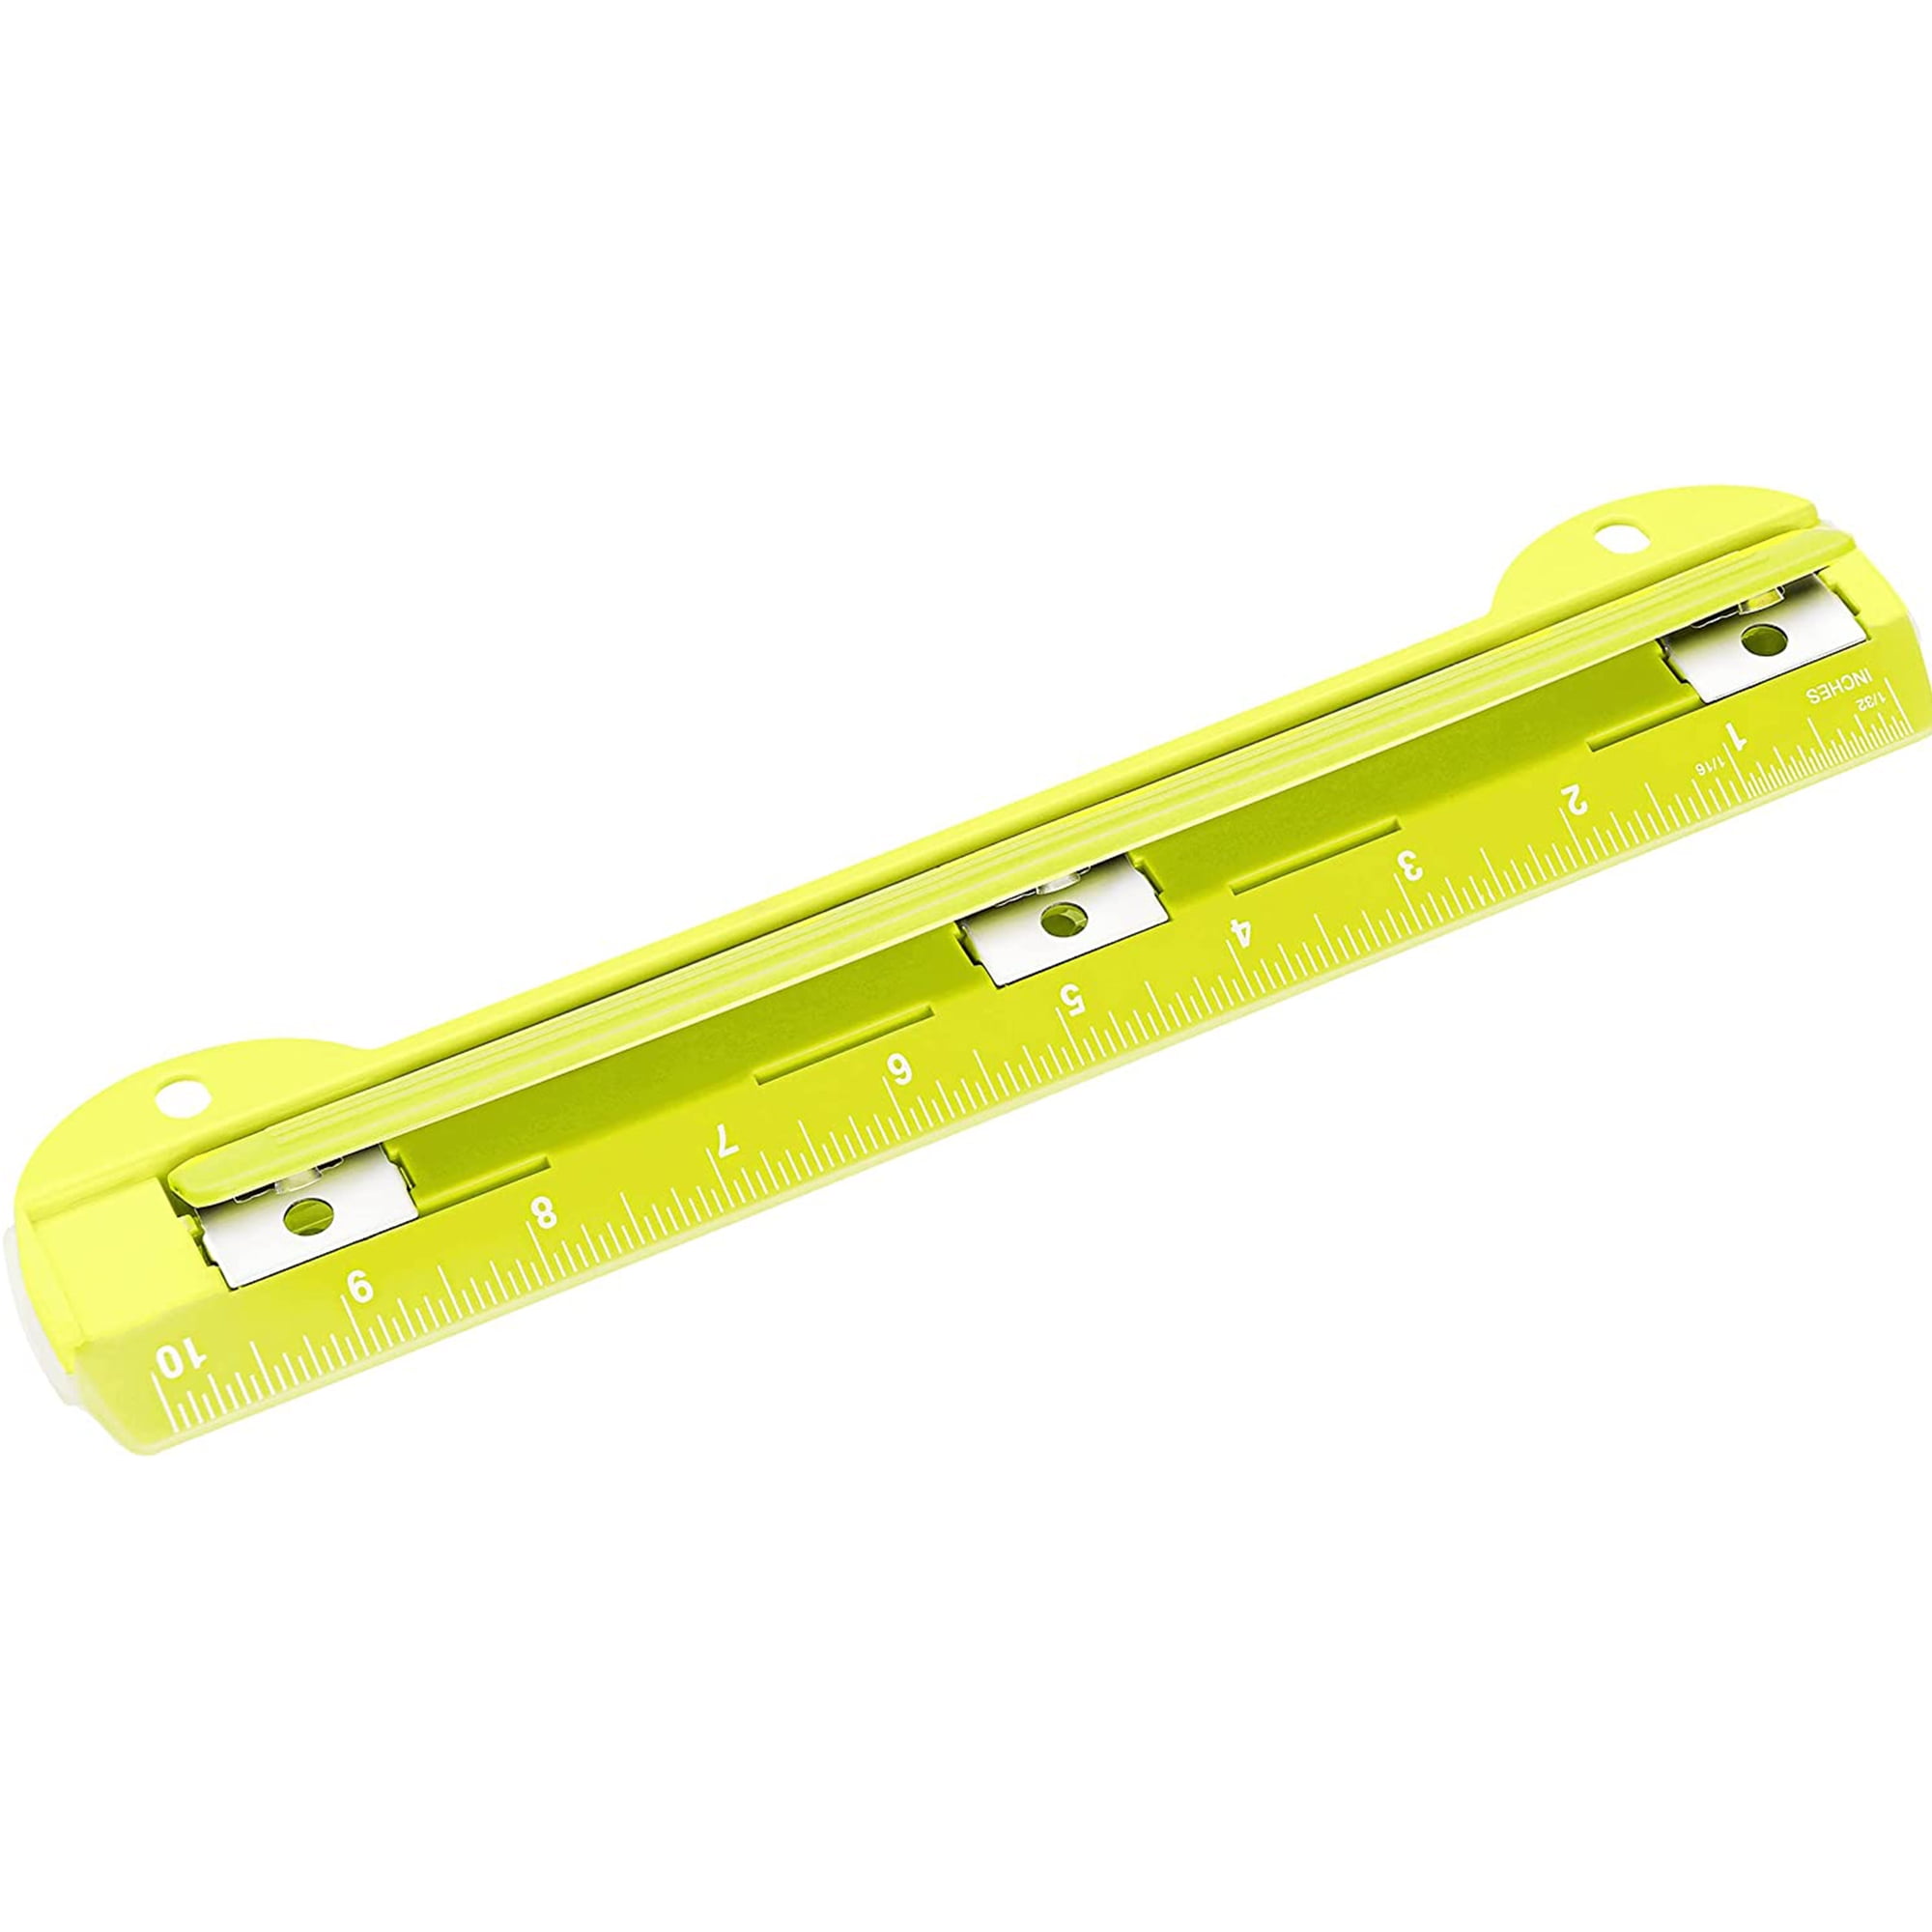 Enday 3 Ring Hole Punch with Plastic Ruler for 3 Ring Binder